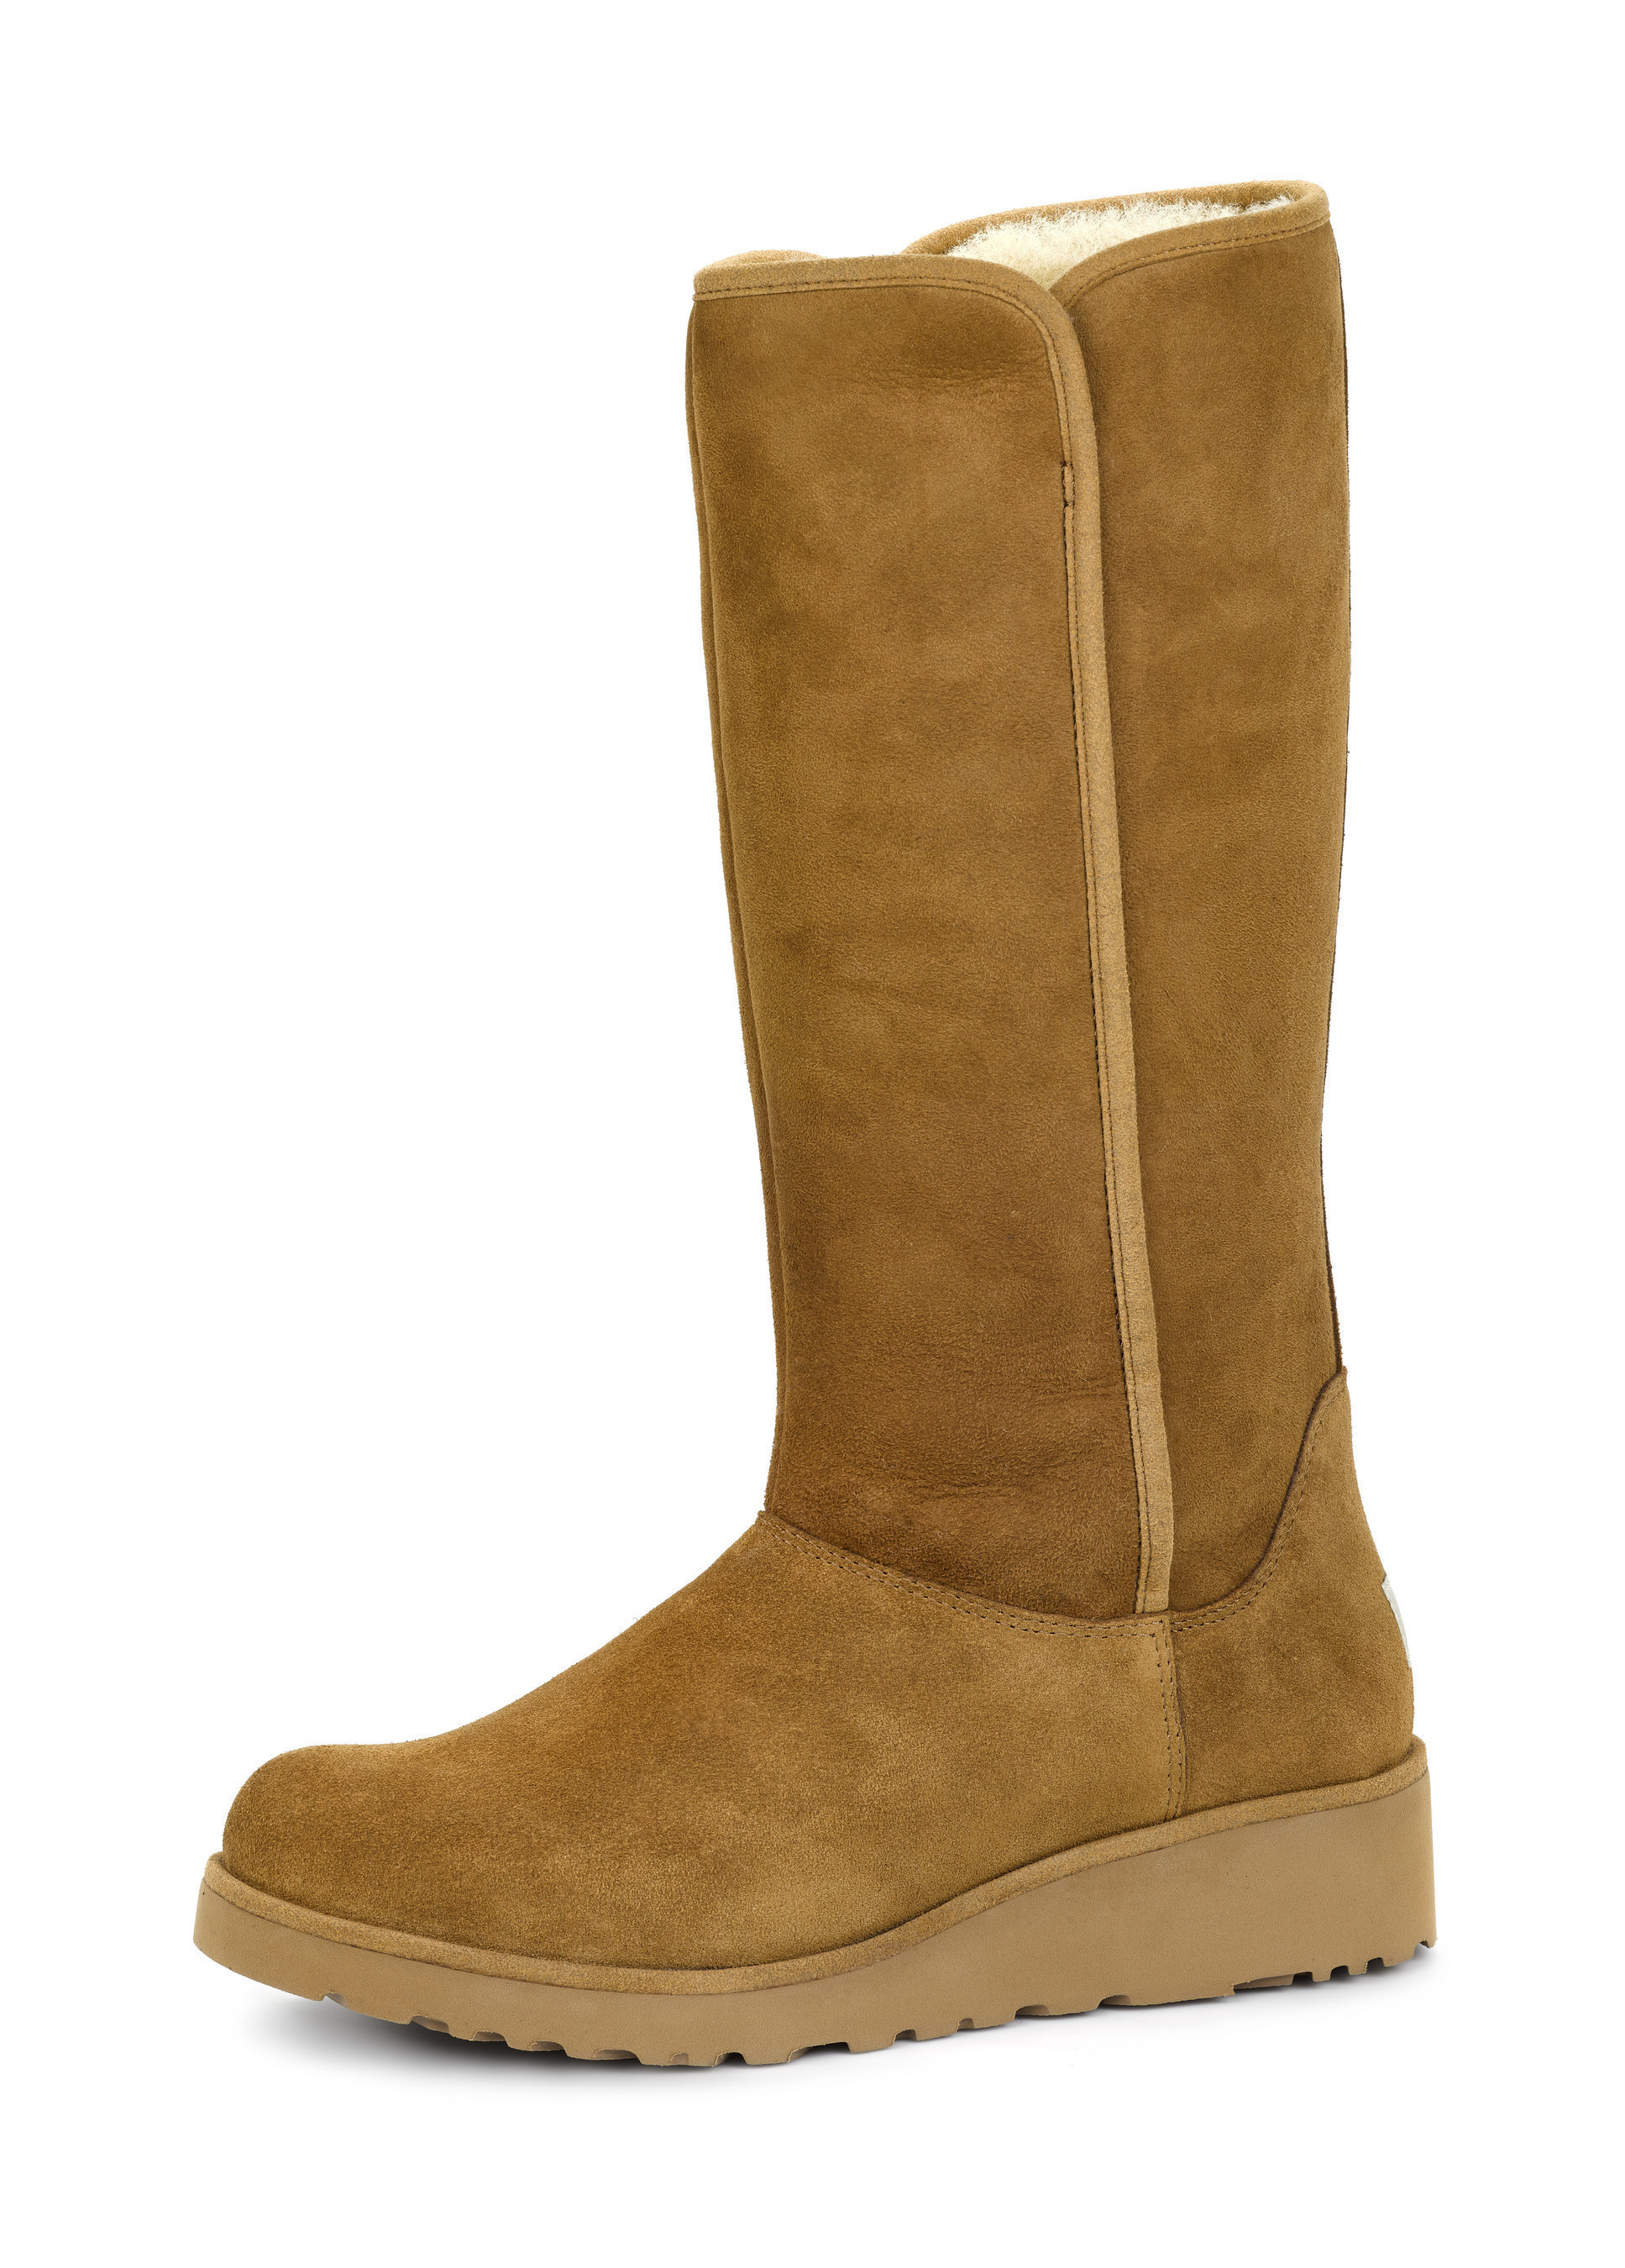 Introducing The UGG Classic Slim: The 